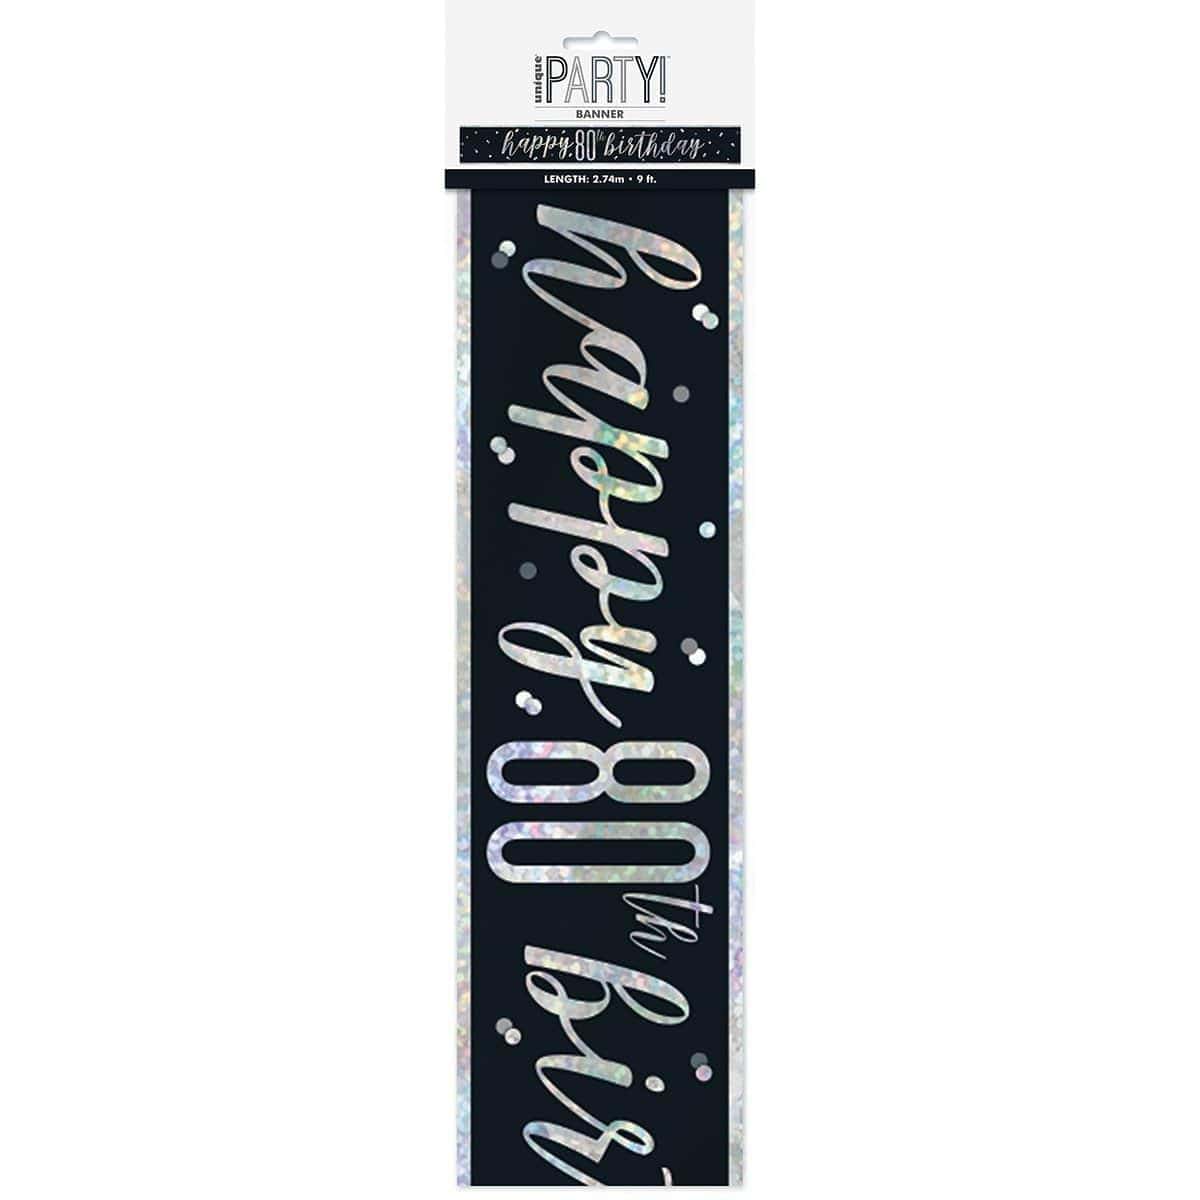 Buy Age Specific Birthday Happy Birthday Black/Silver - Foil Banner - 80th sold at Party Expert